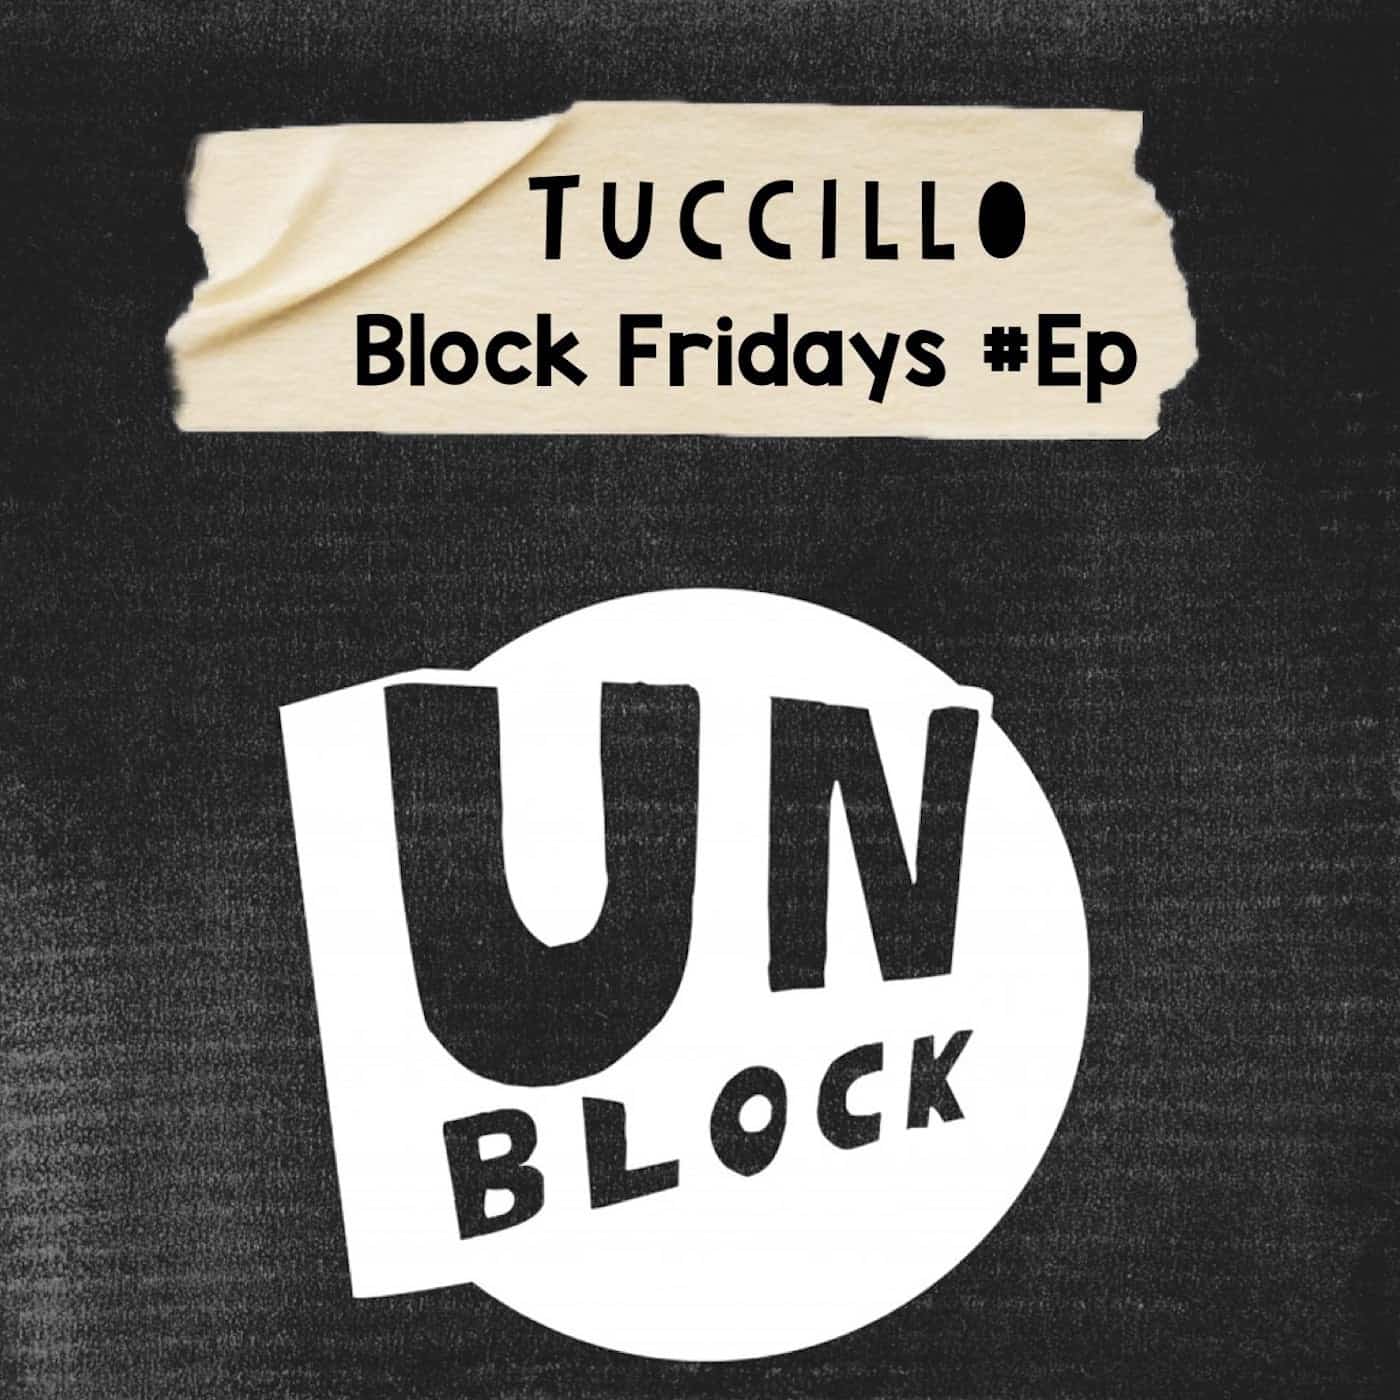 Download Tuccillo - Block Fridays EP on Electrobuzz